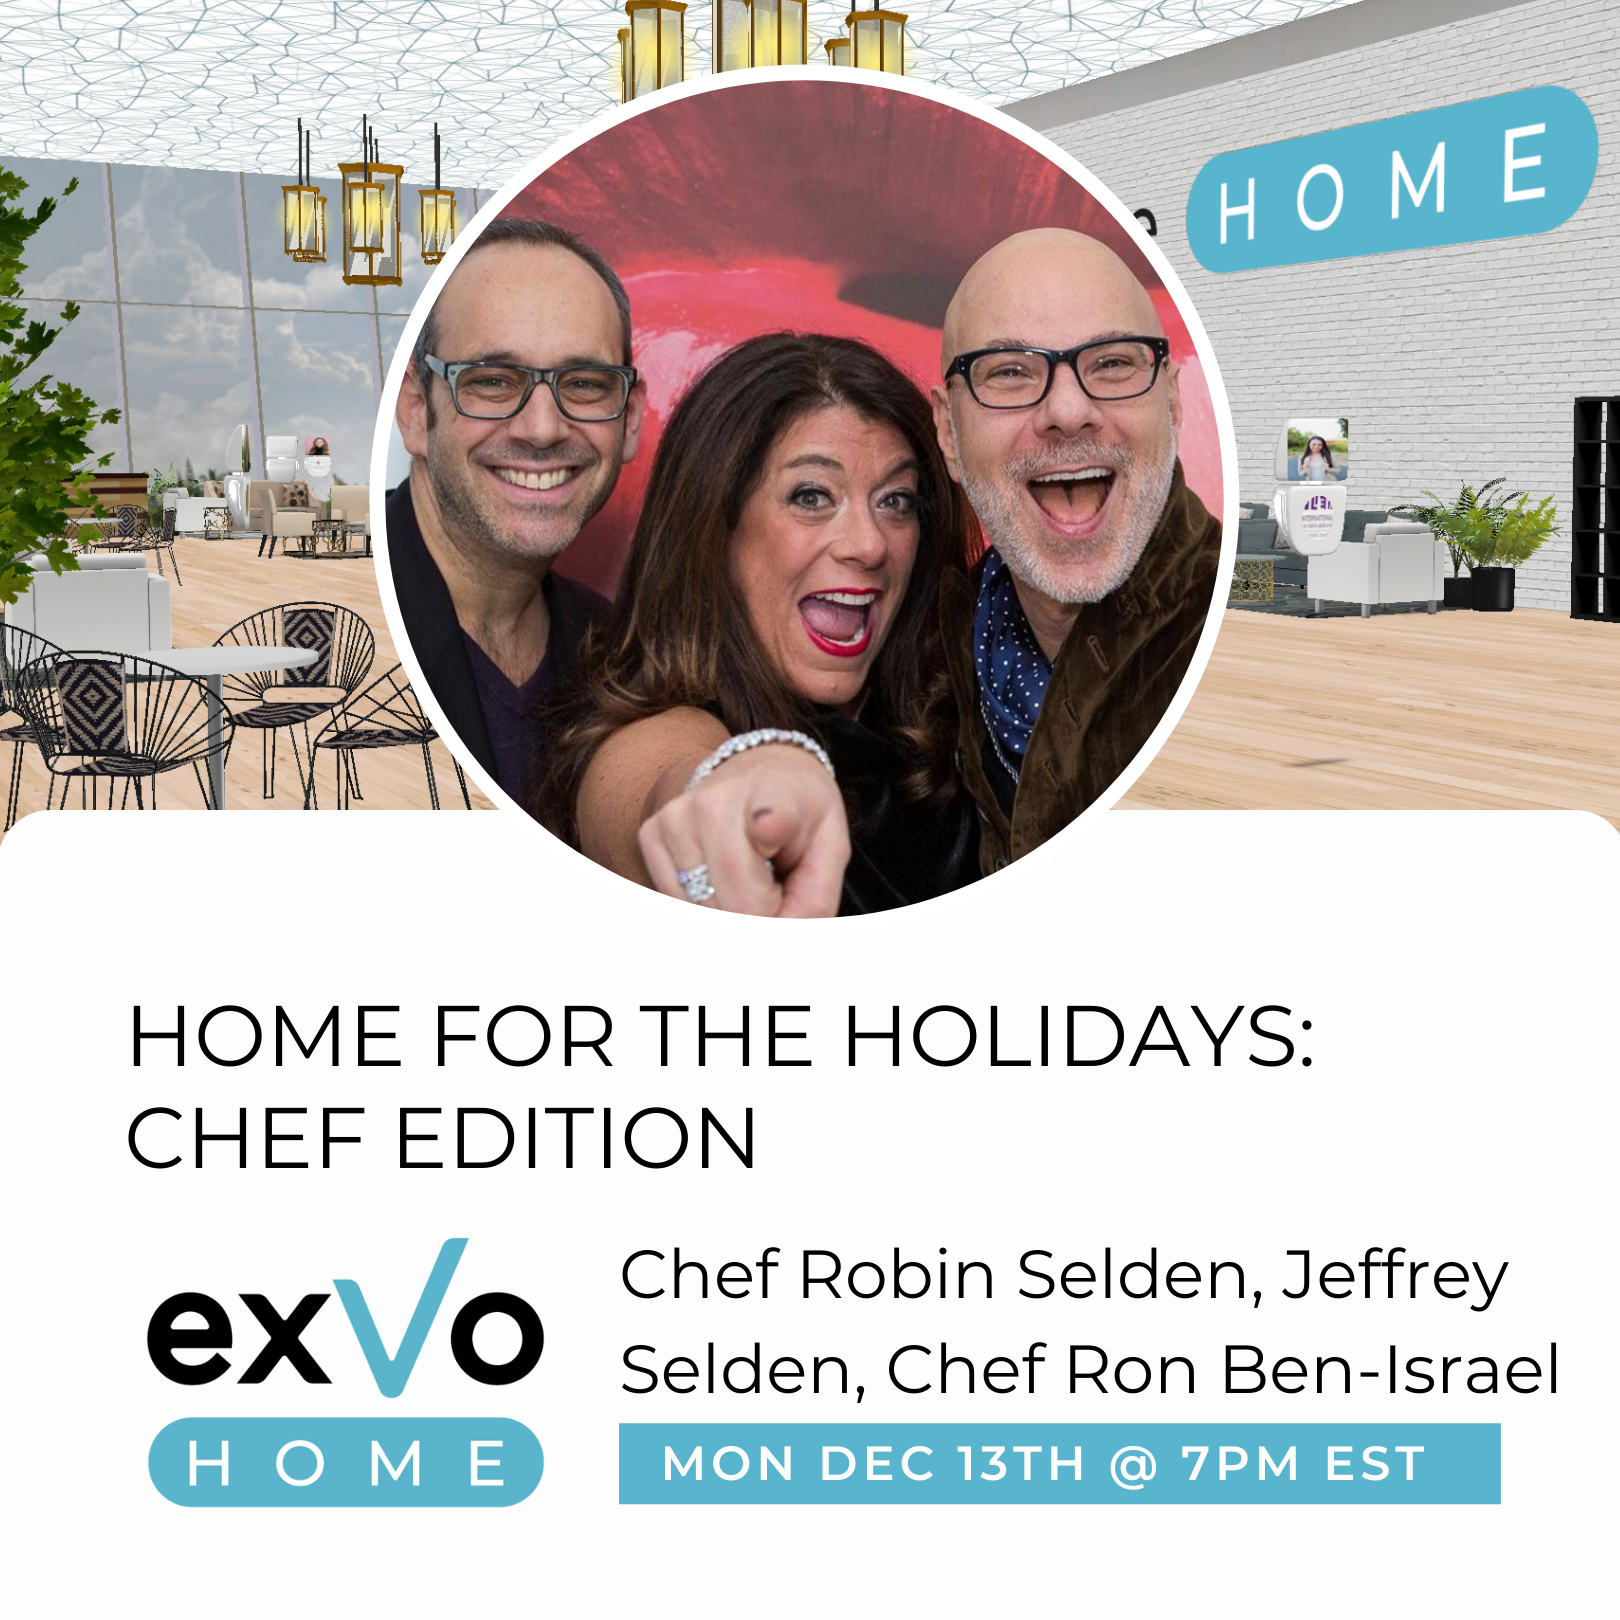 EXVO HOME for the Holidays Chef Edition